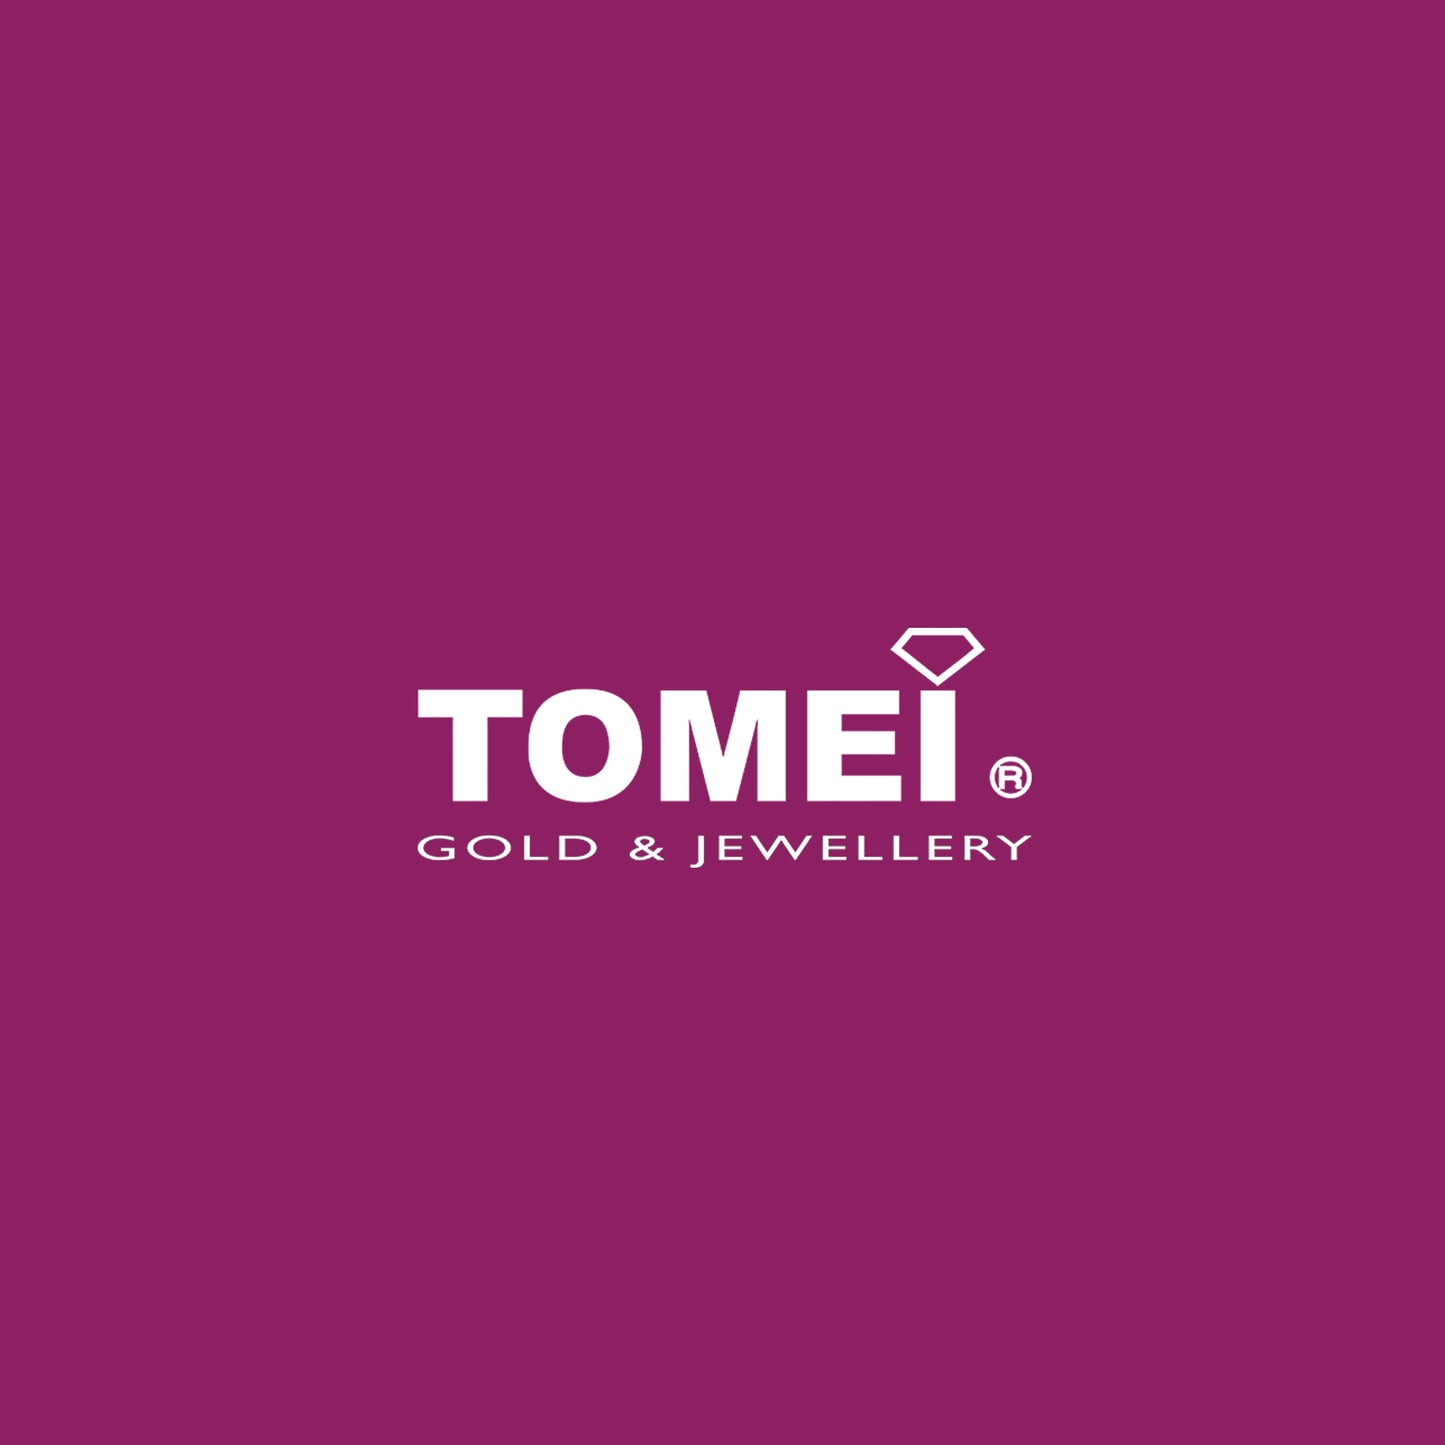 TOMEI X Hello Kitty in Red Pendant, Yellow Gold 916 (HK-YG0824P-EC-1.80G)